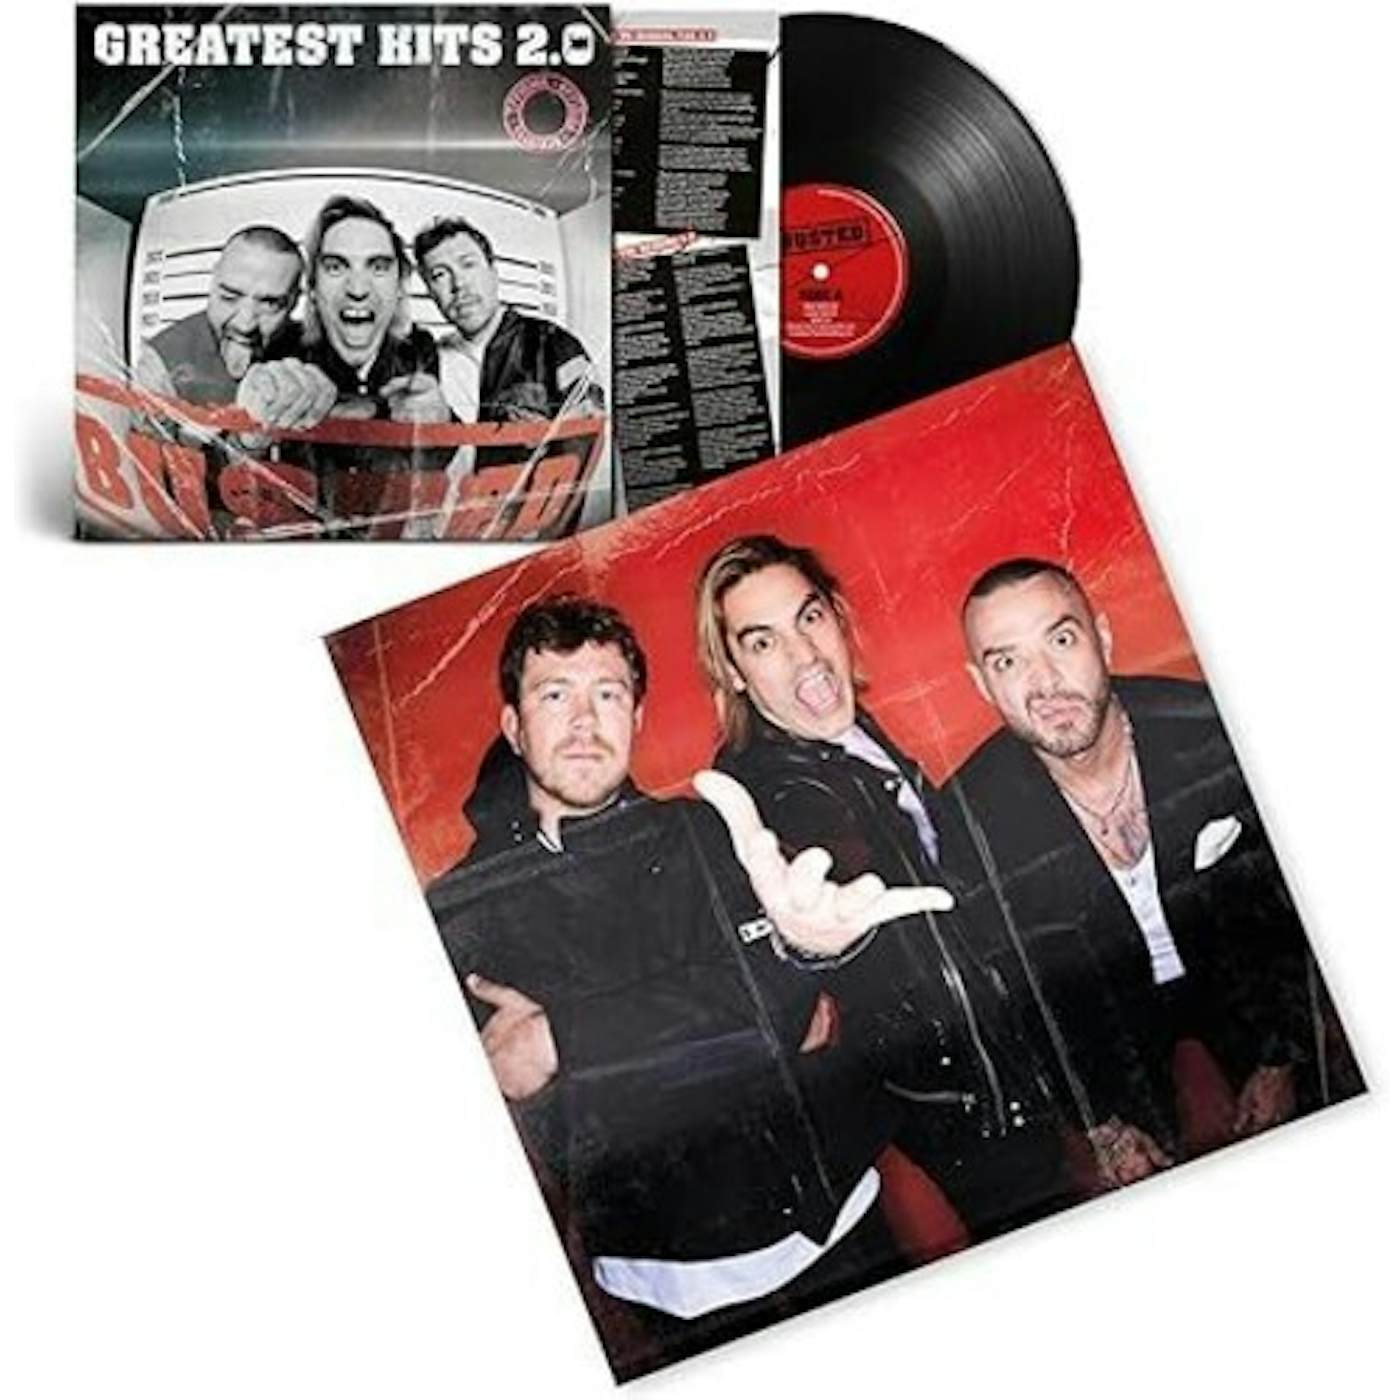 Busted Greatest Hits 2.0 Vinyl Record